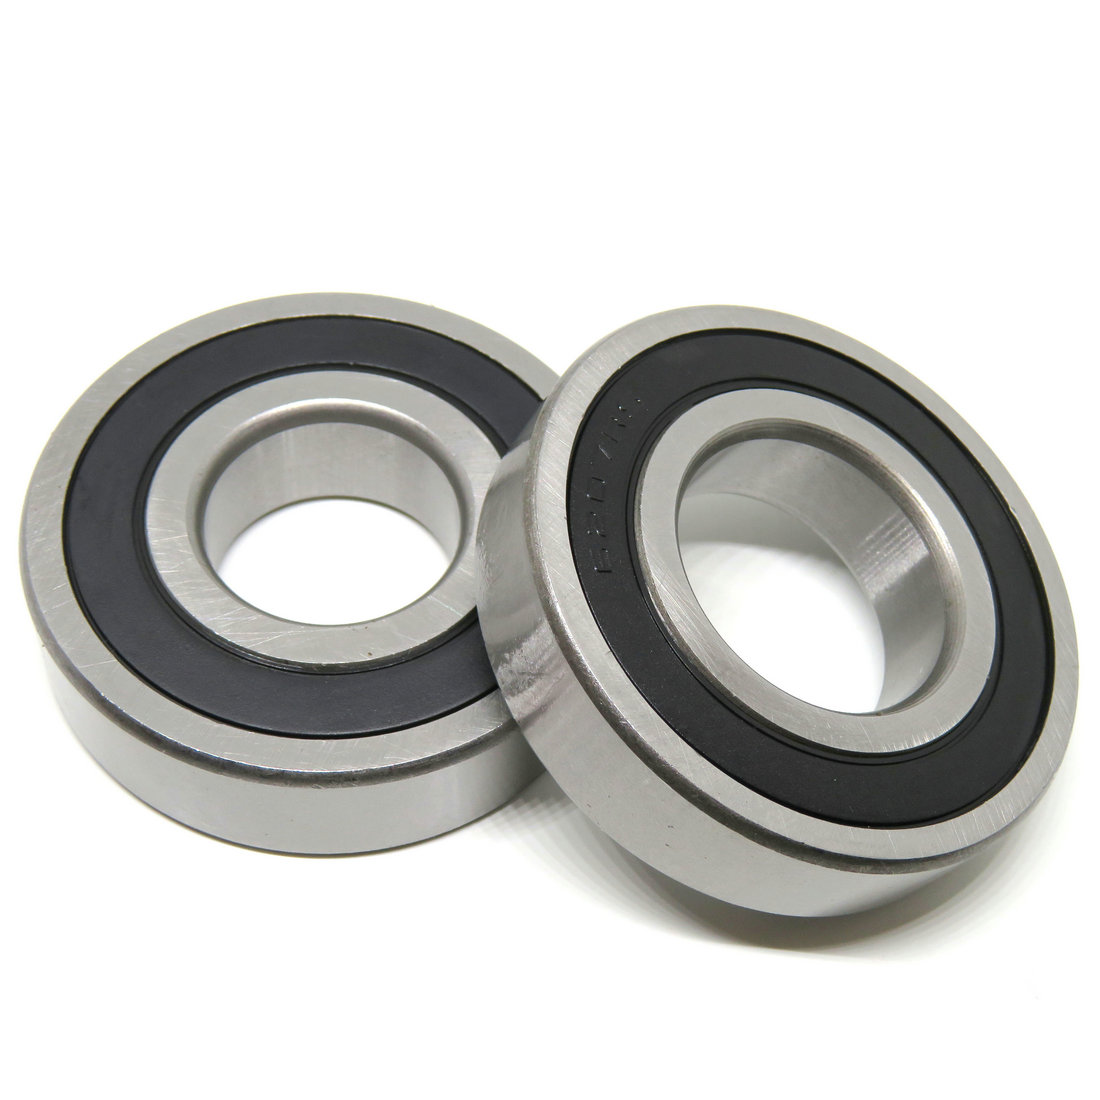 Electric Hand Power tool Bearing Parts 6210RS Bearings 50mm ID 90mm OD 20mm Width 6210 RS.jpg